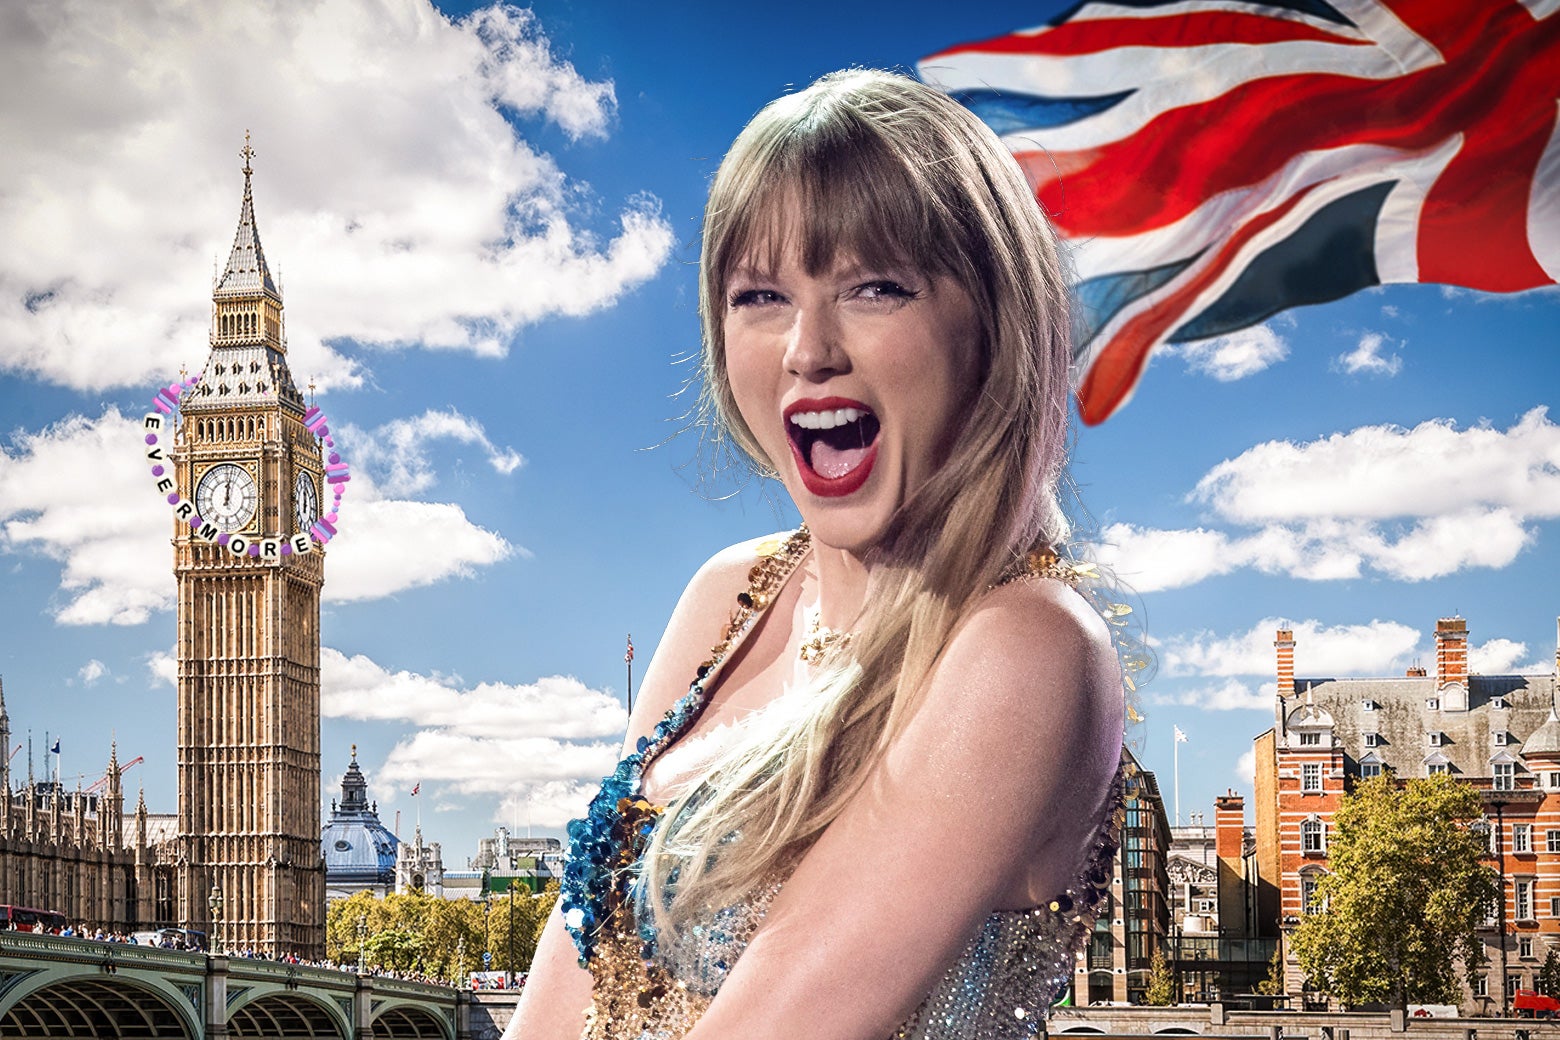 Taylor Swift in a sparkly "Eras" bodysuit in front of major London landmarks, including the Union Jack flag and Big Ben, which is adorned with an Evermore friendship bracelet.